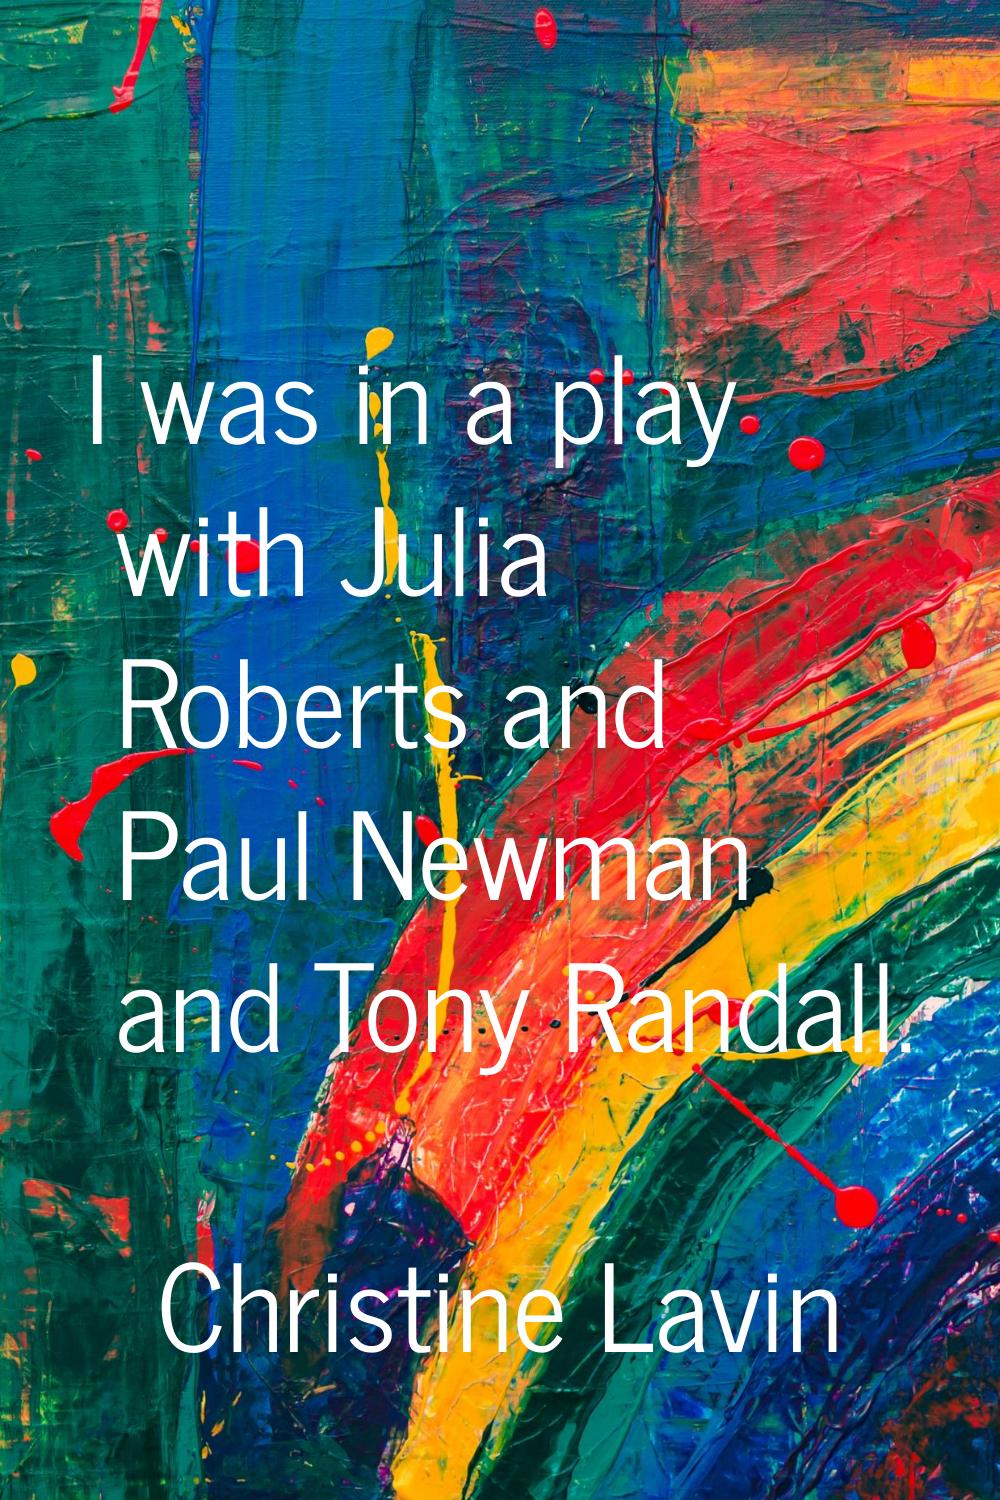 I was in a play with Julia Roberts and Paul Newman and Tony Randall.